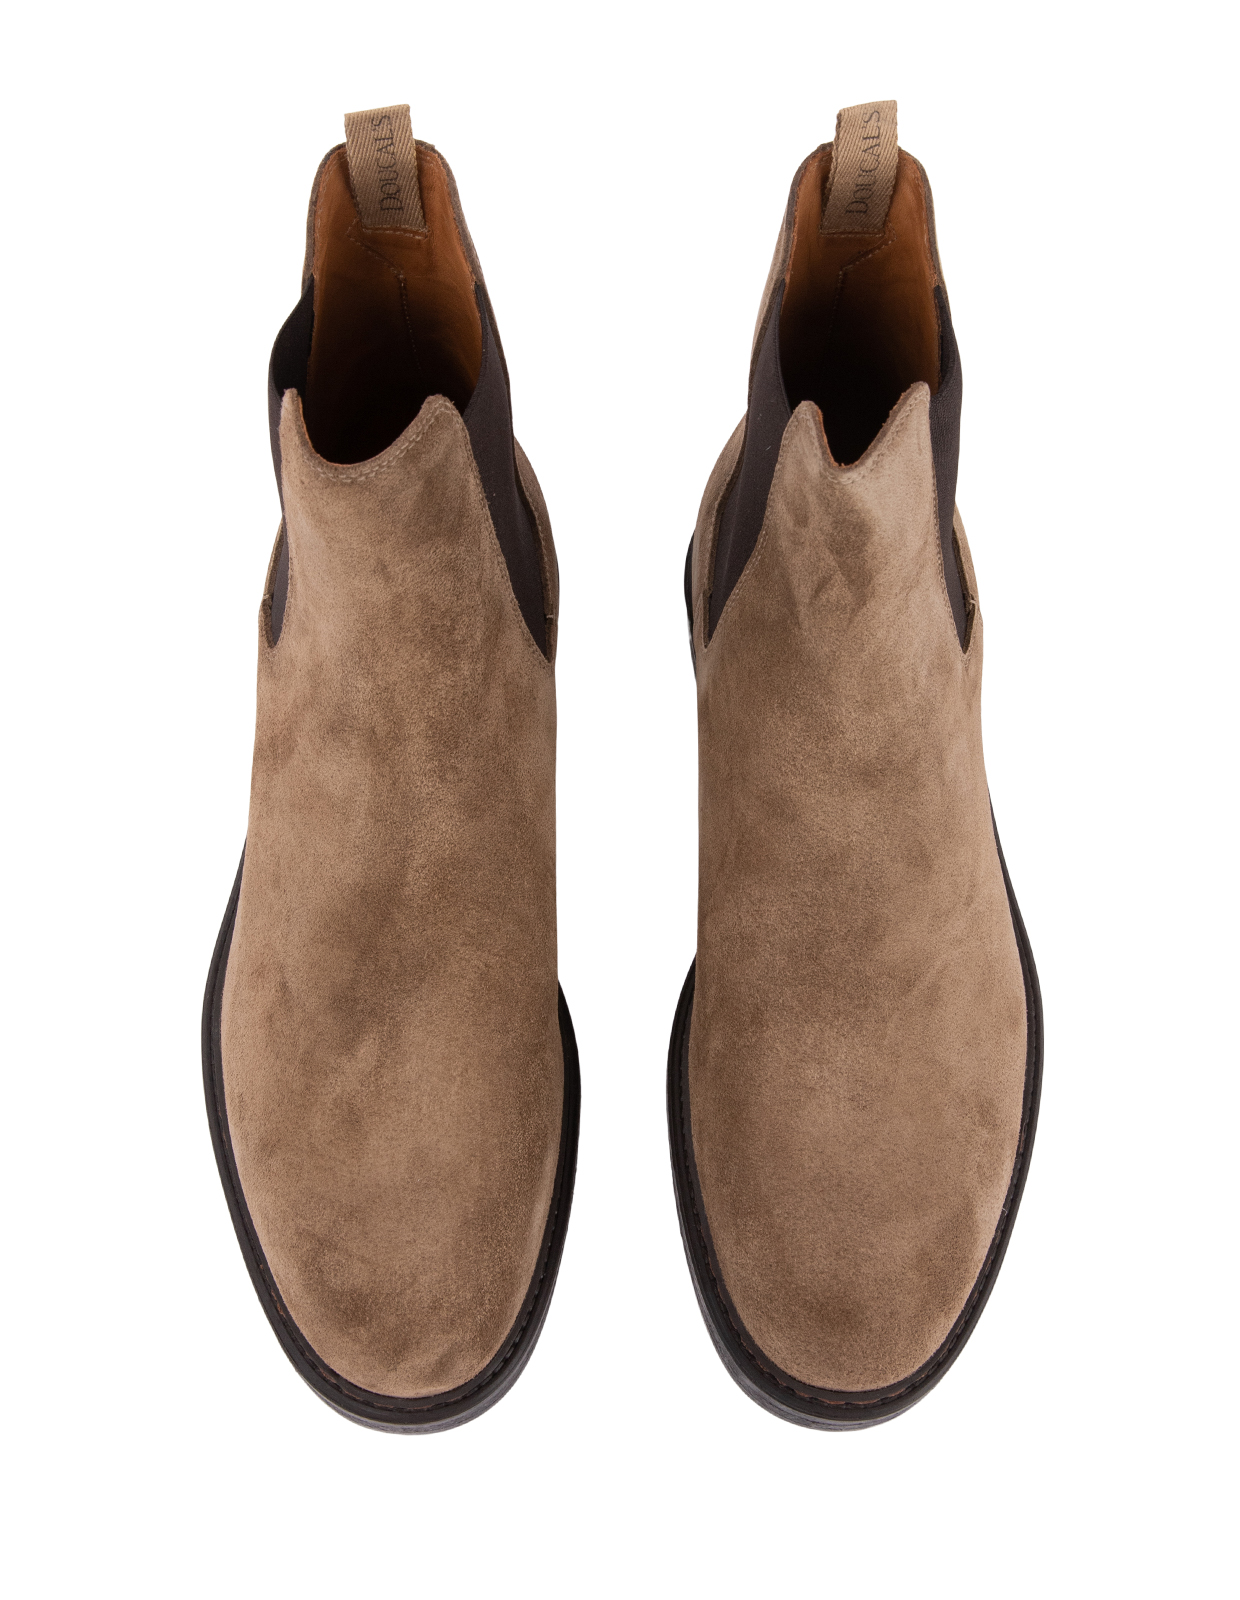 Chelsea Boots Tabacco Stl 41